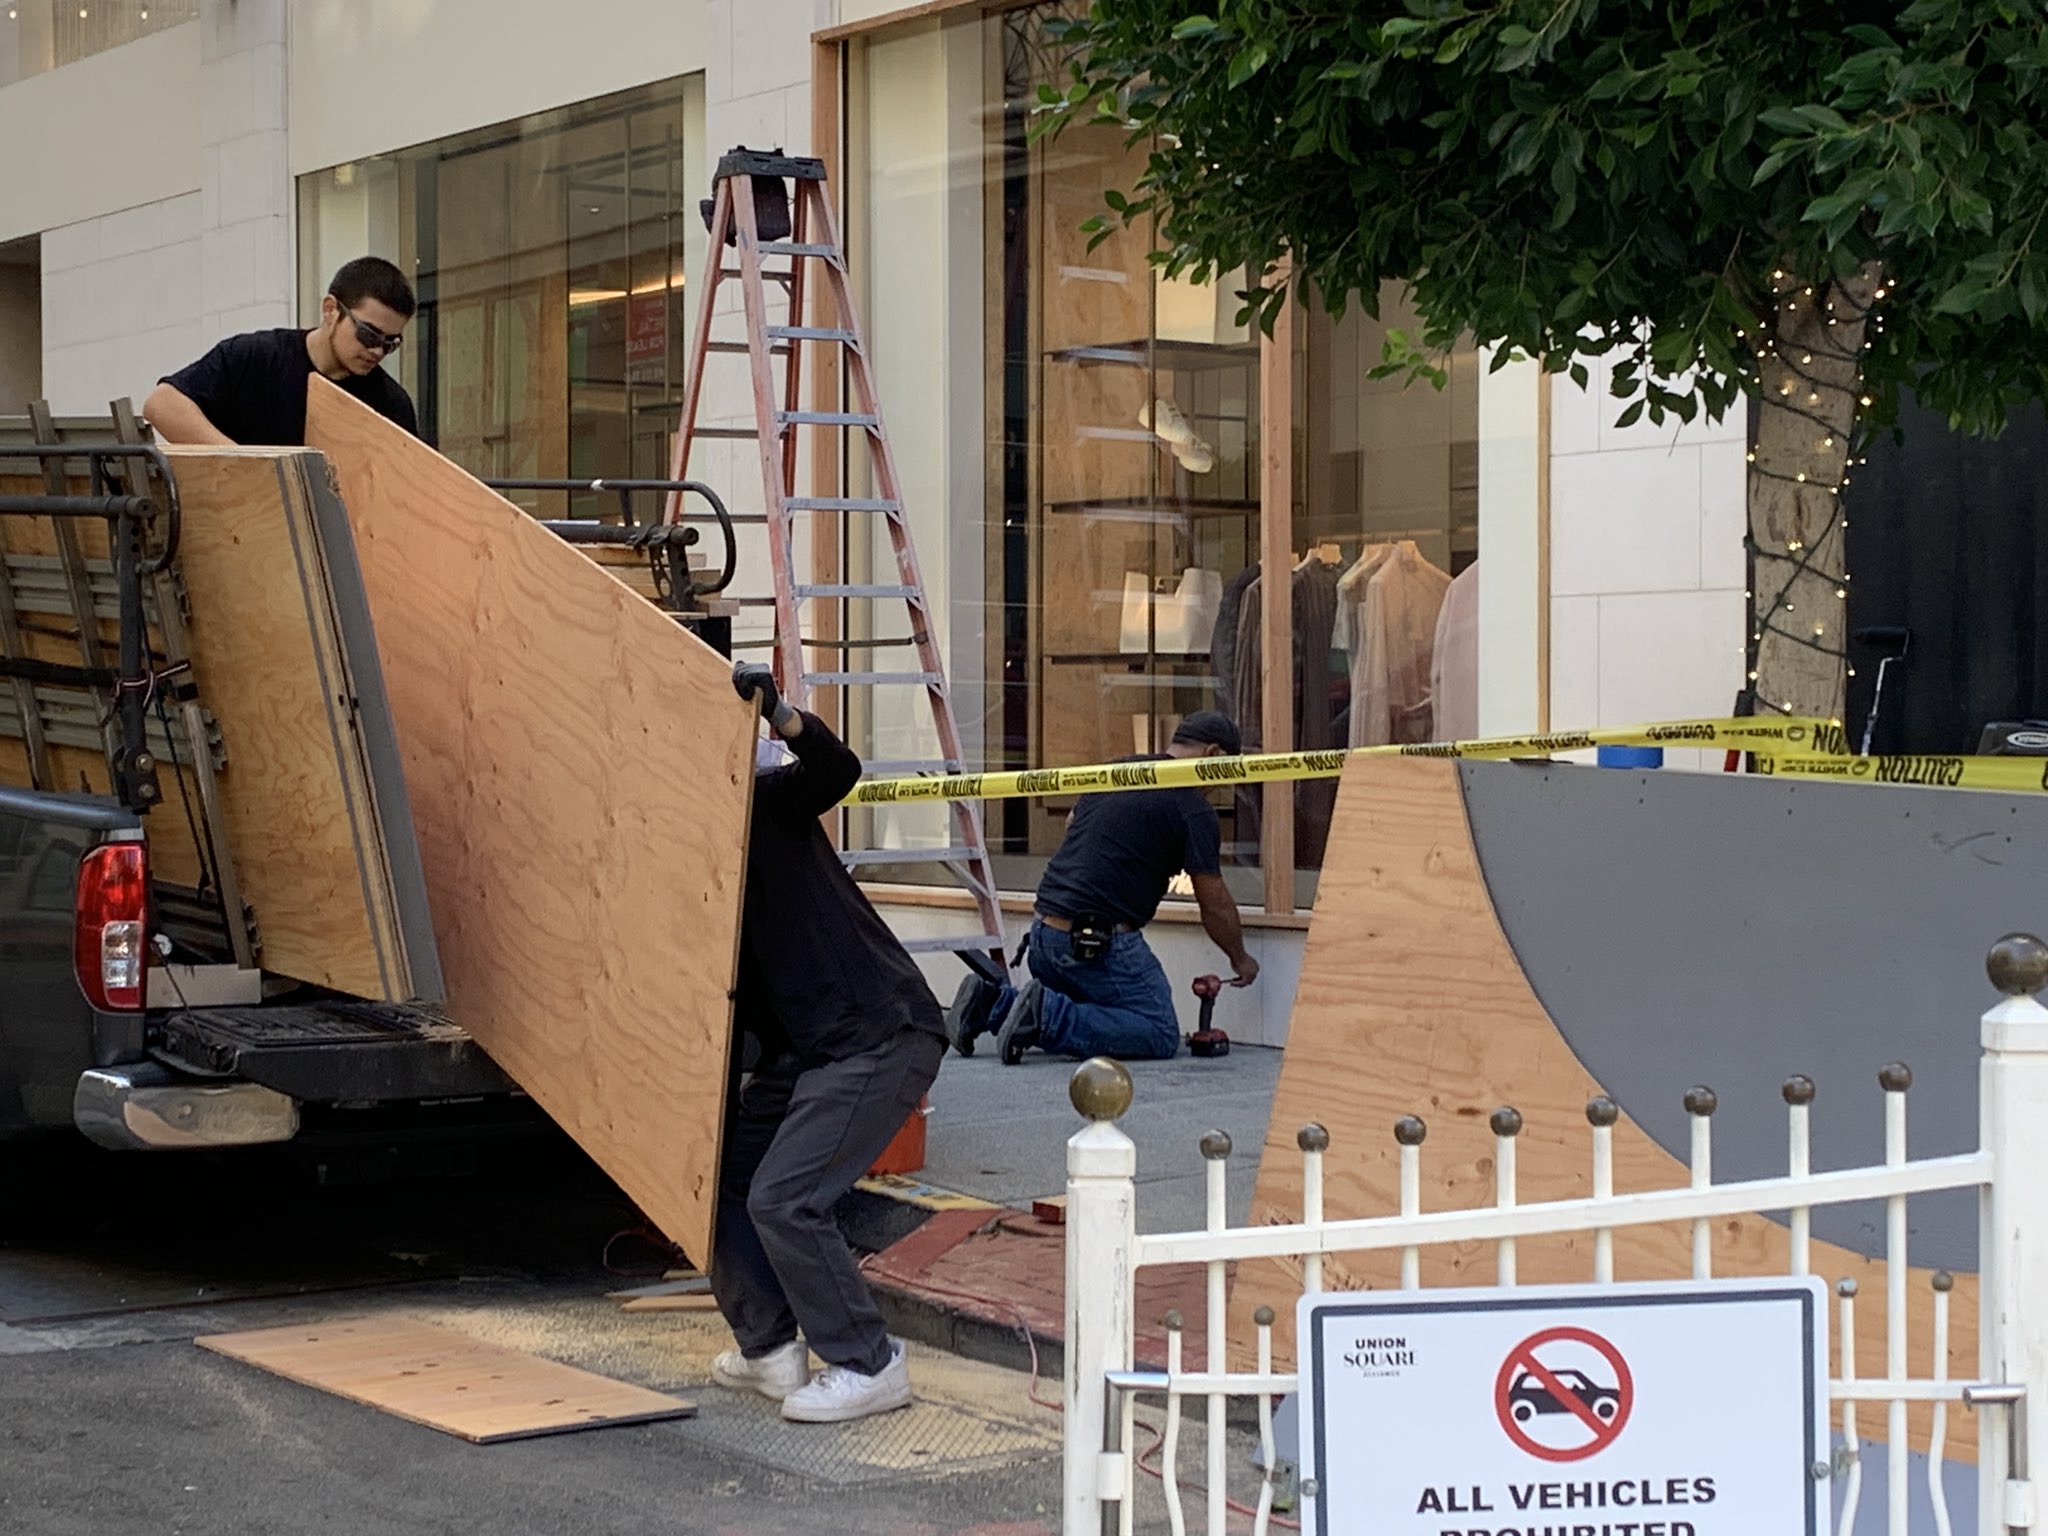 Louis Vuitton store in SF's Union Square 'emptied out' by thieves